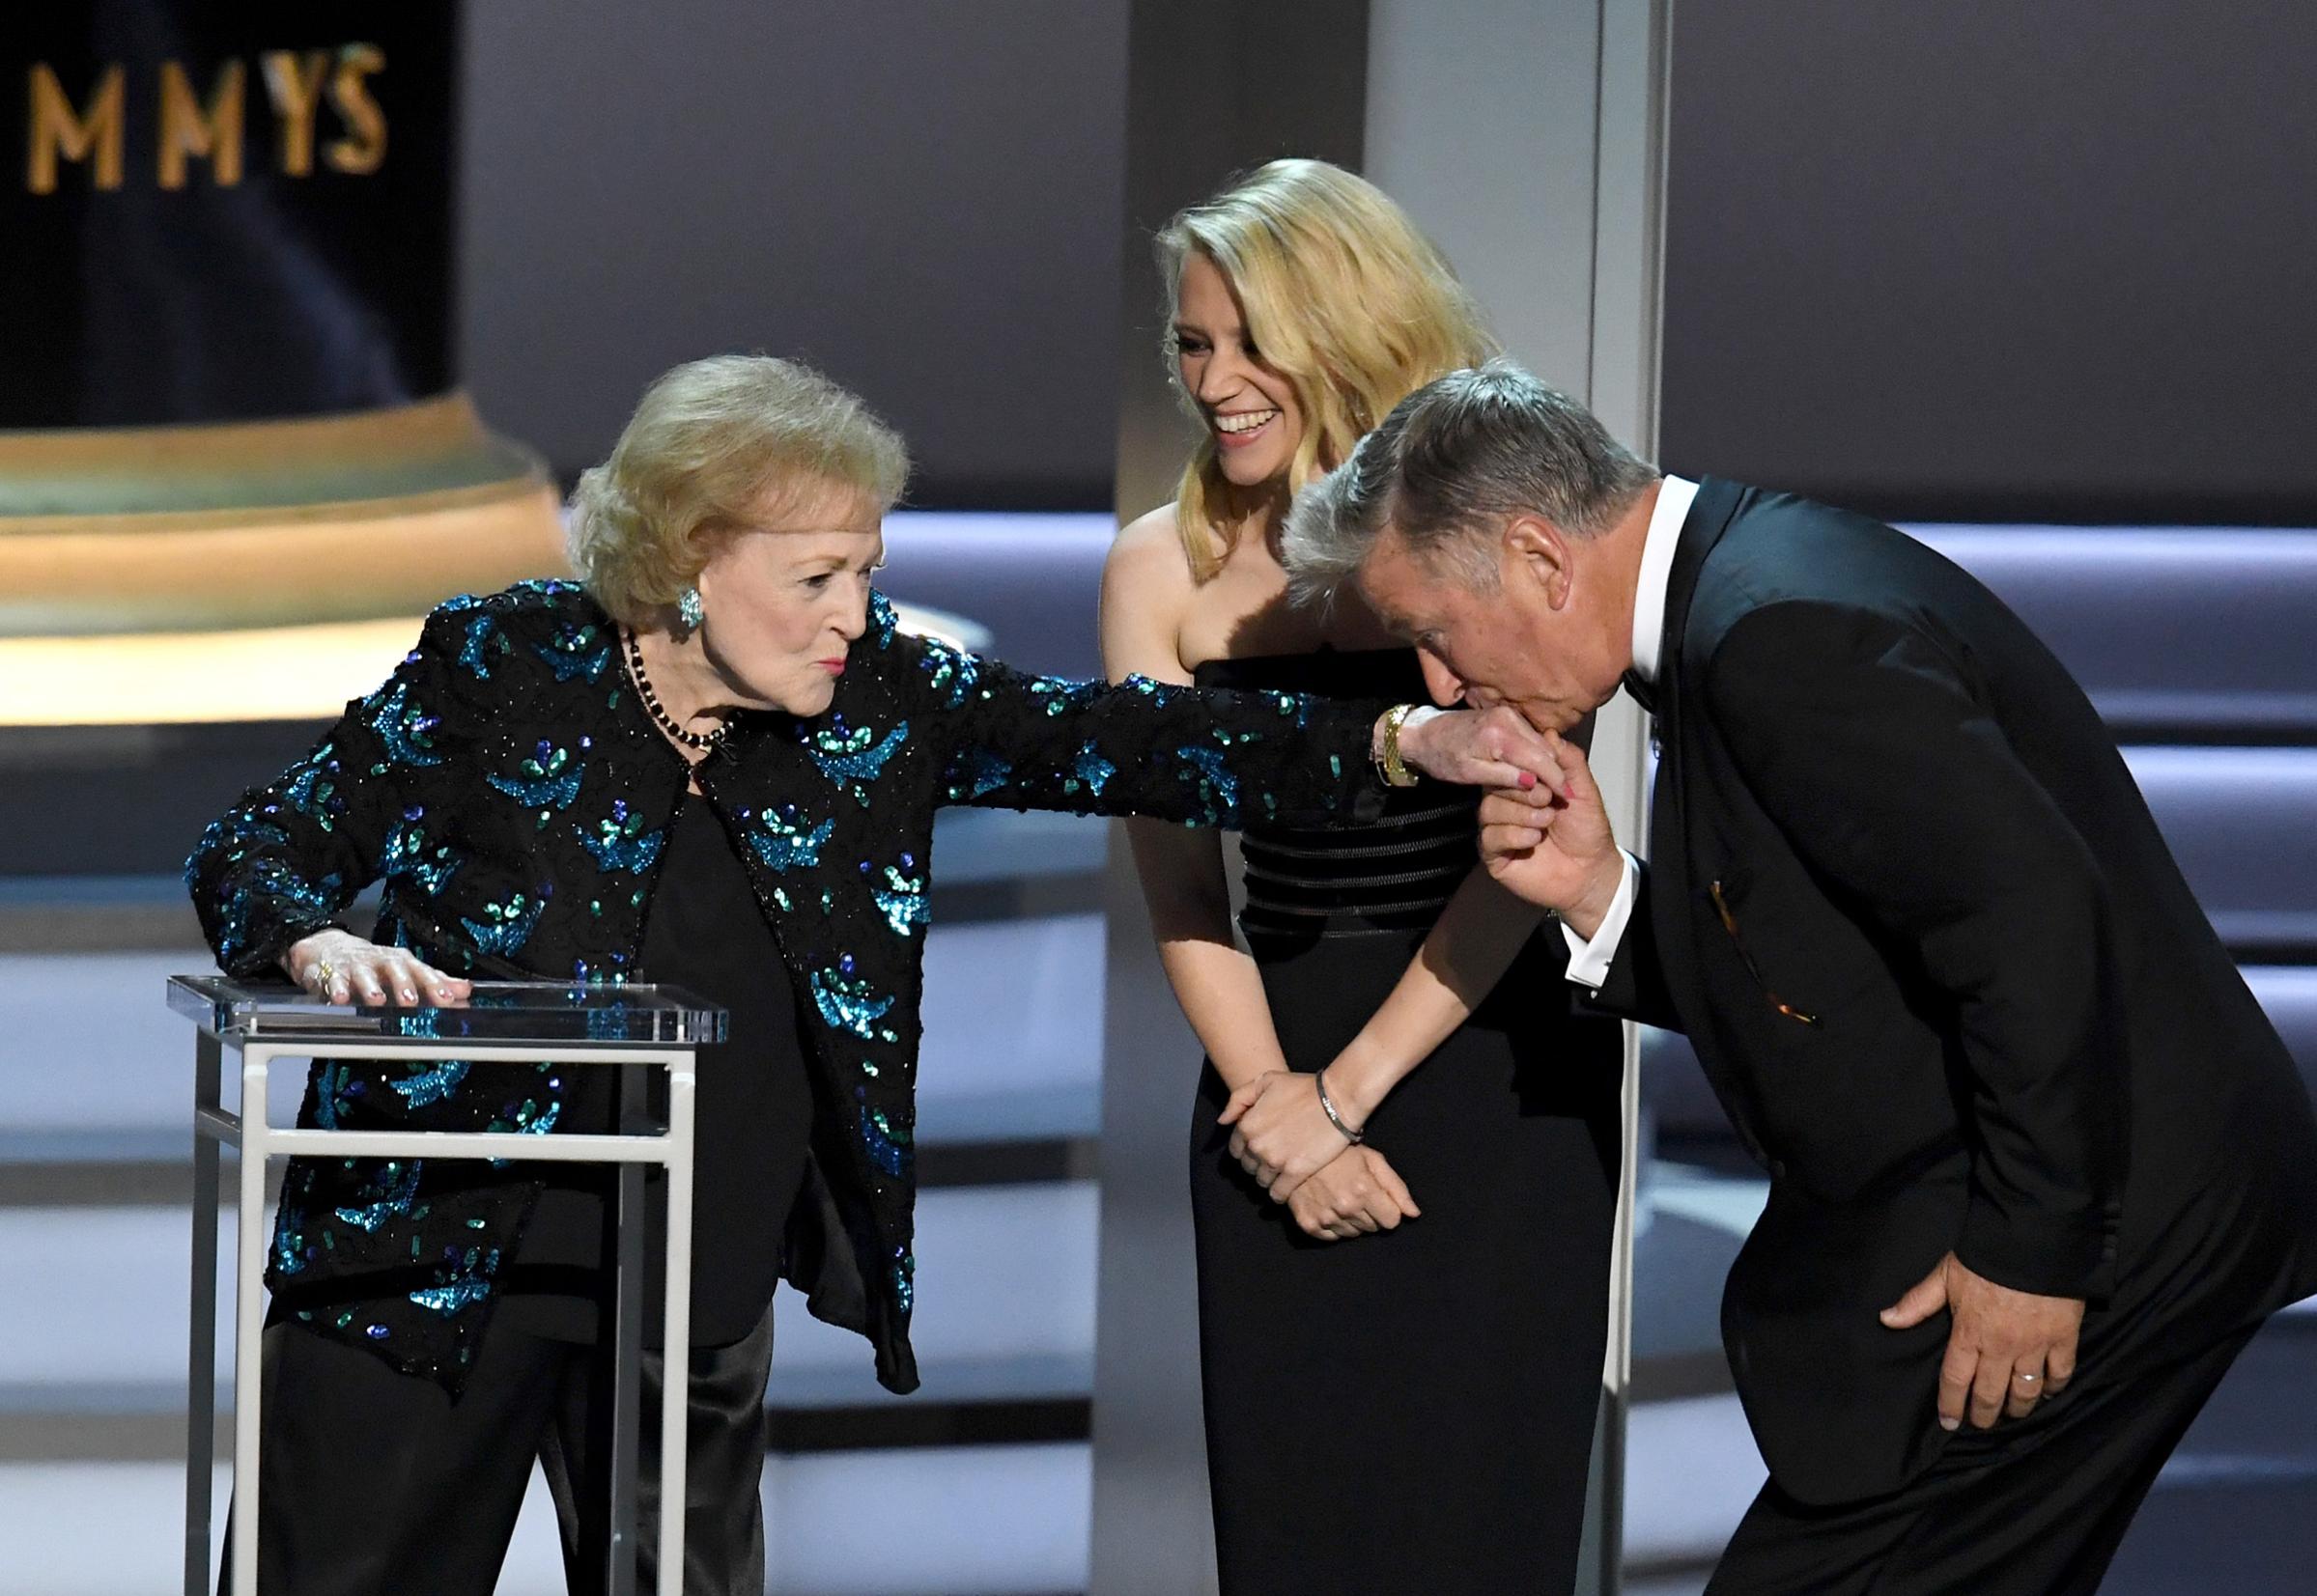 Betty White, Kate McKinnon, and Alec Baldwin speak onstage during the 70th Emmy Awards at Microsoft Theater on Sept. 17, 2018 in Los Angeles.